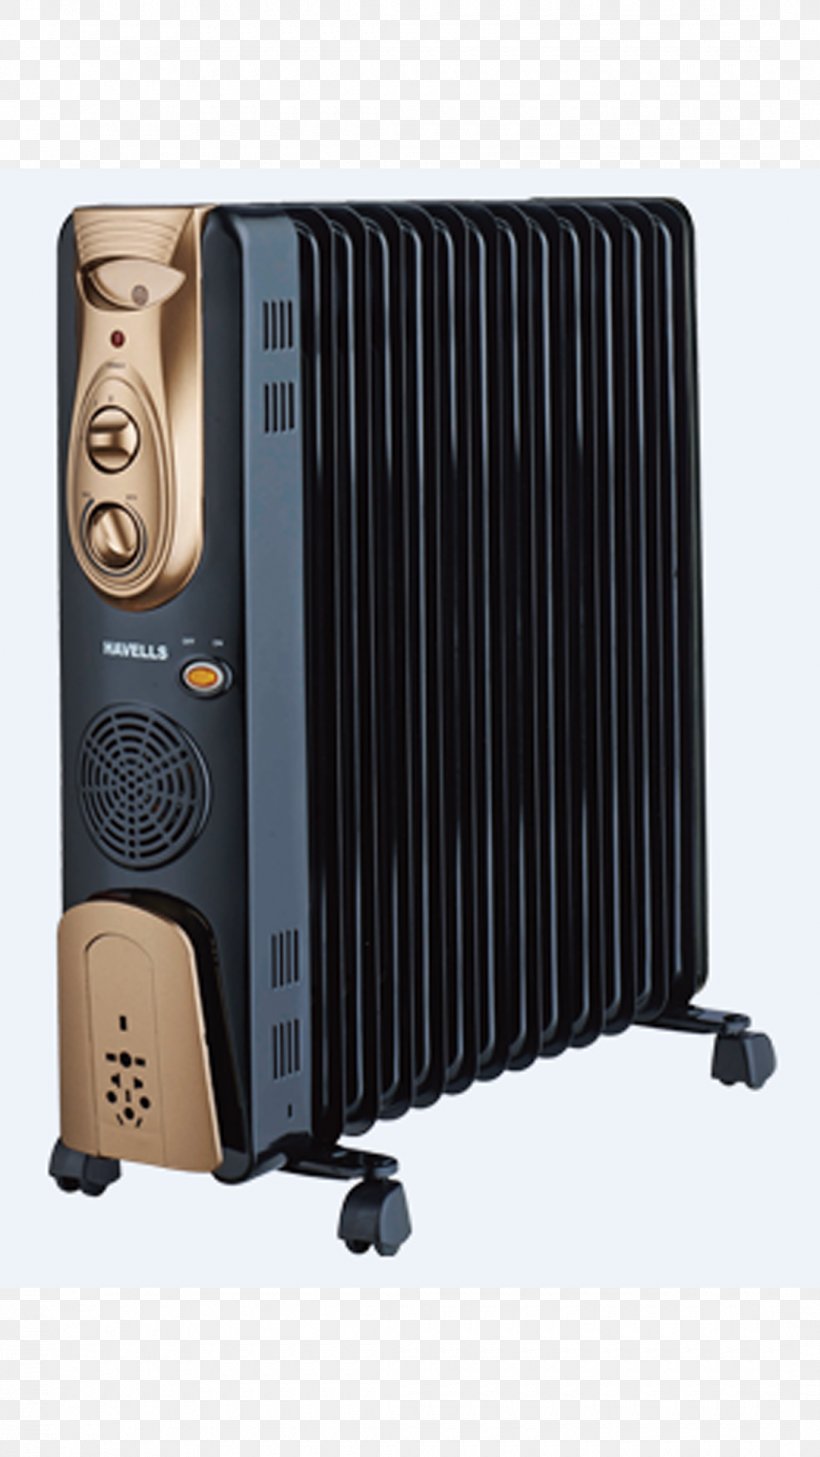 India Oil Heater Havells Fan Heater, PNG, 1080x1920px, India, Fan, Fan Heater, Havells, Heater Download Free